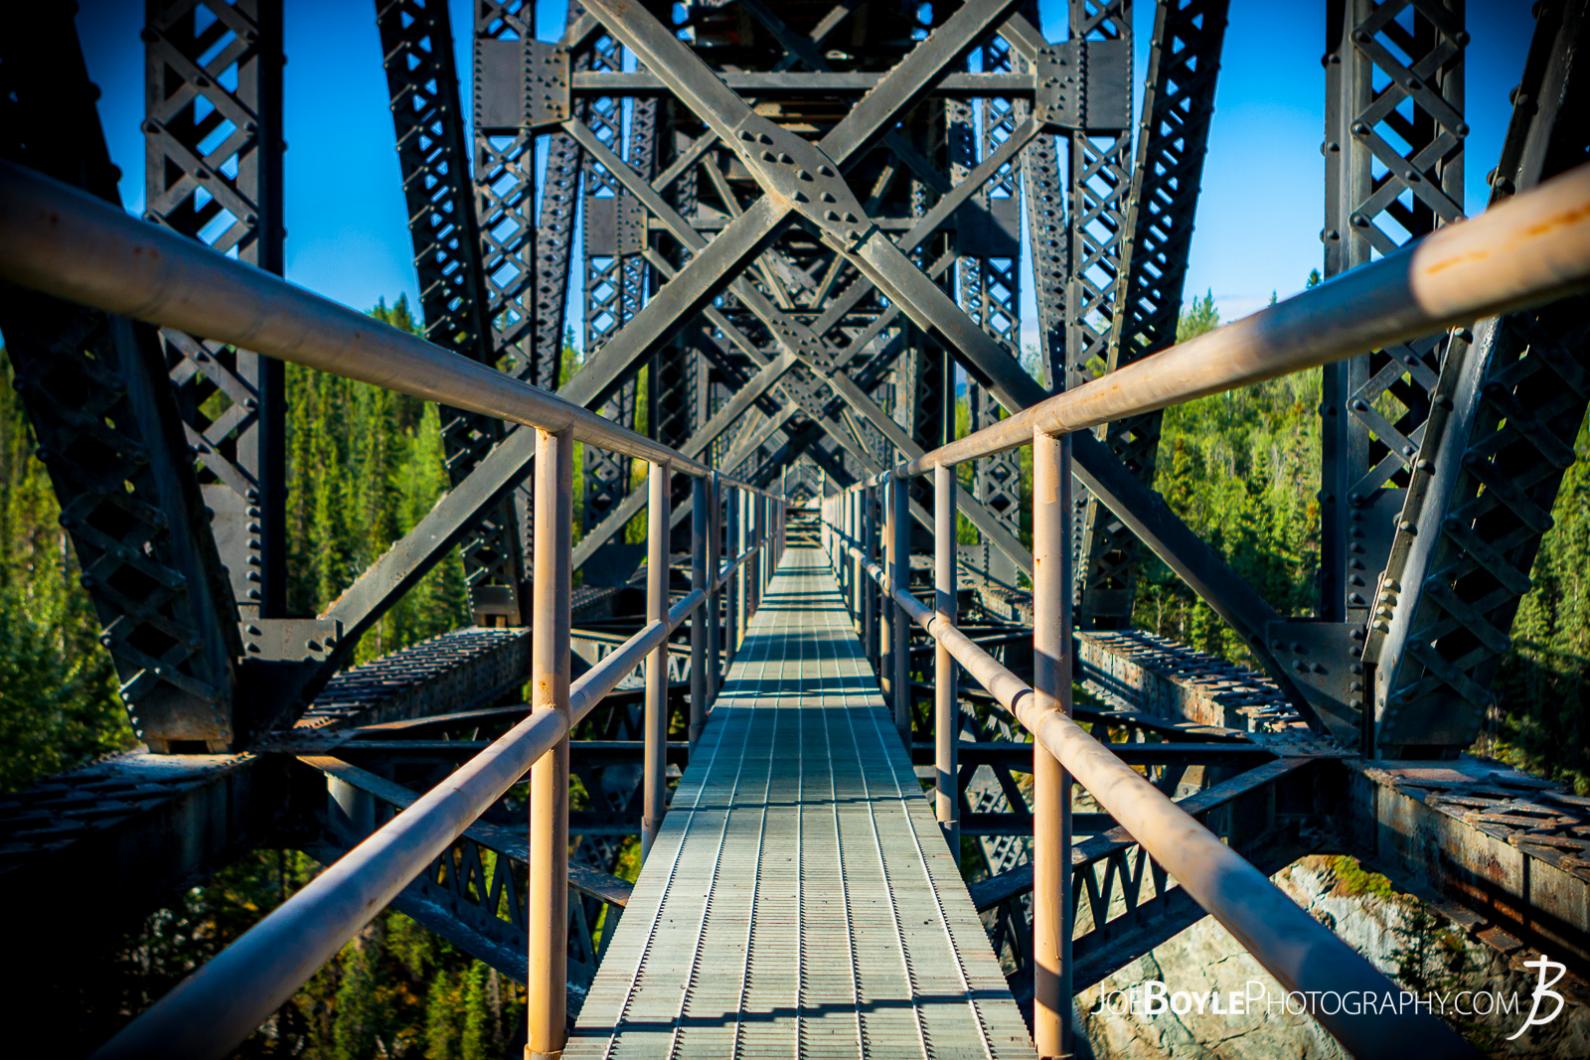 My hiking buddy and myself had enough driving for one day so we pulled off of Denali Highway and spent the night near this cool looking bridge. 